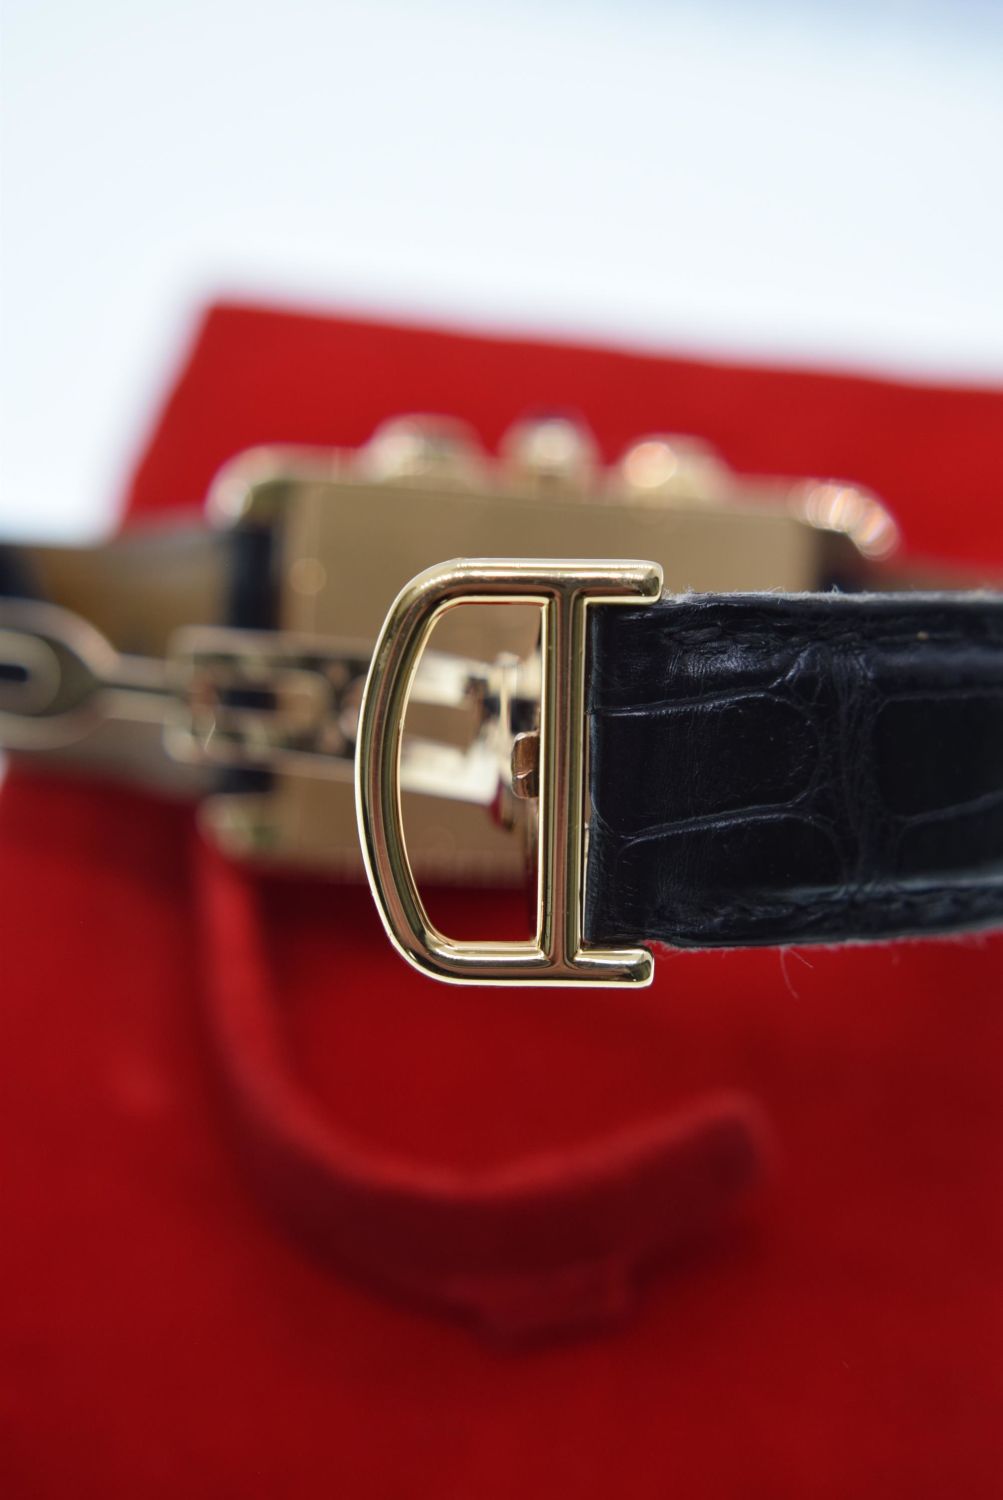 18K GOLD CARTIER TANK AMERICAINE REF. 1730 ON BLACK LEATHER WITH CARTIER SIGNED CLASP - Image 6 of 9